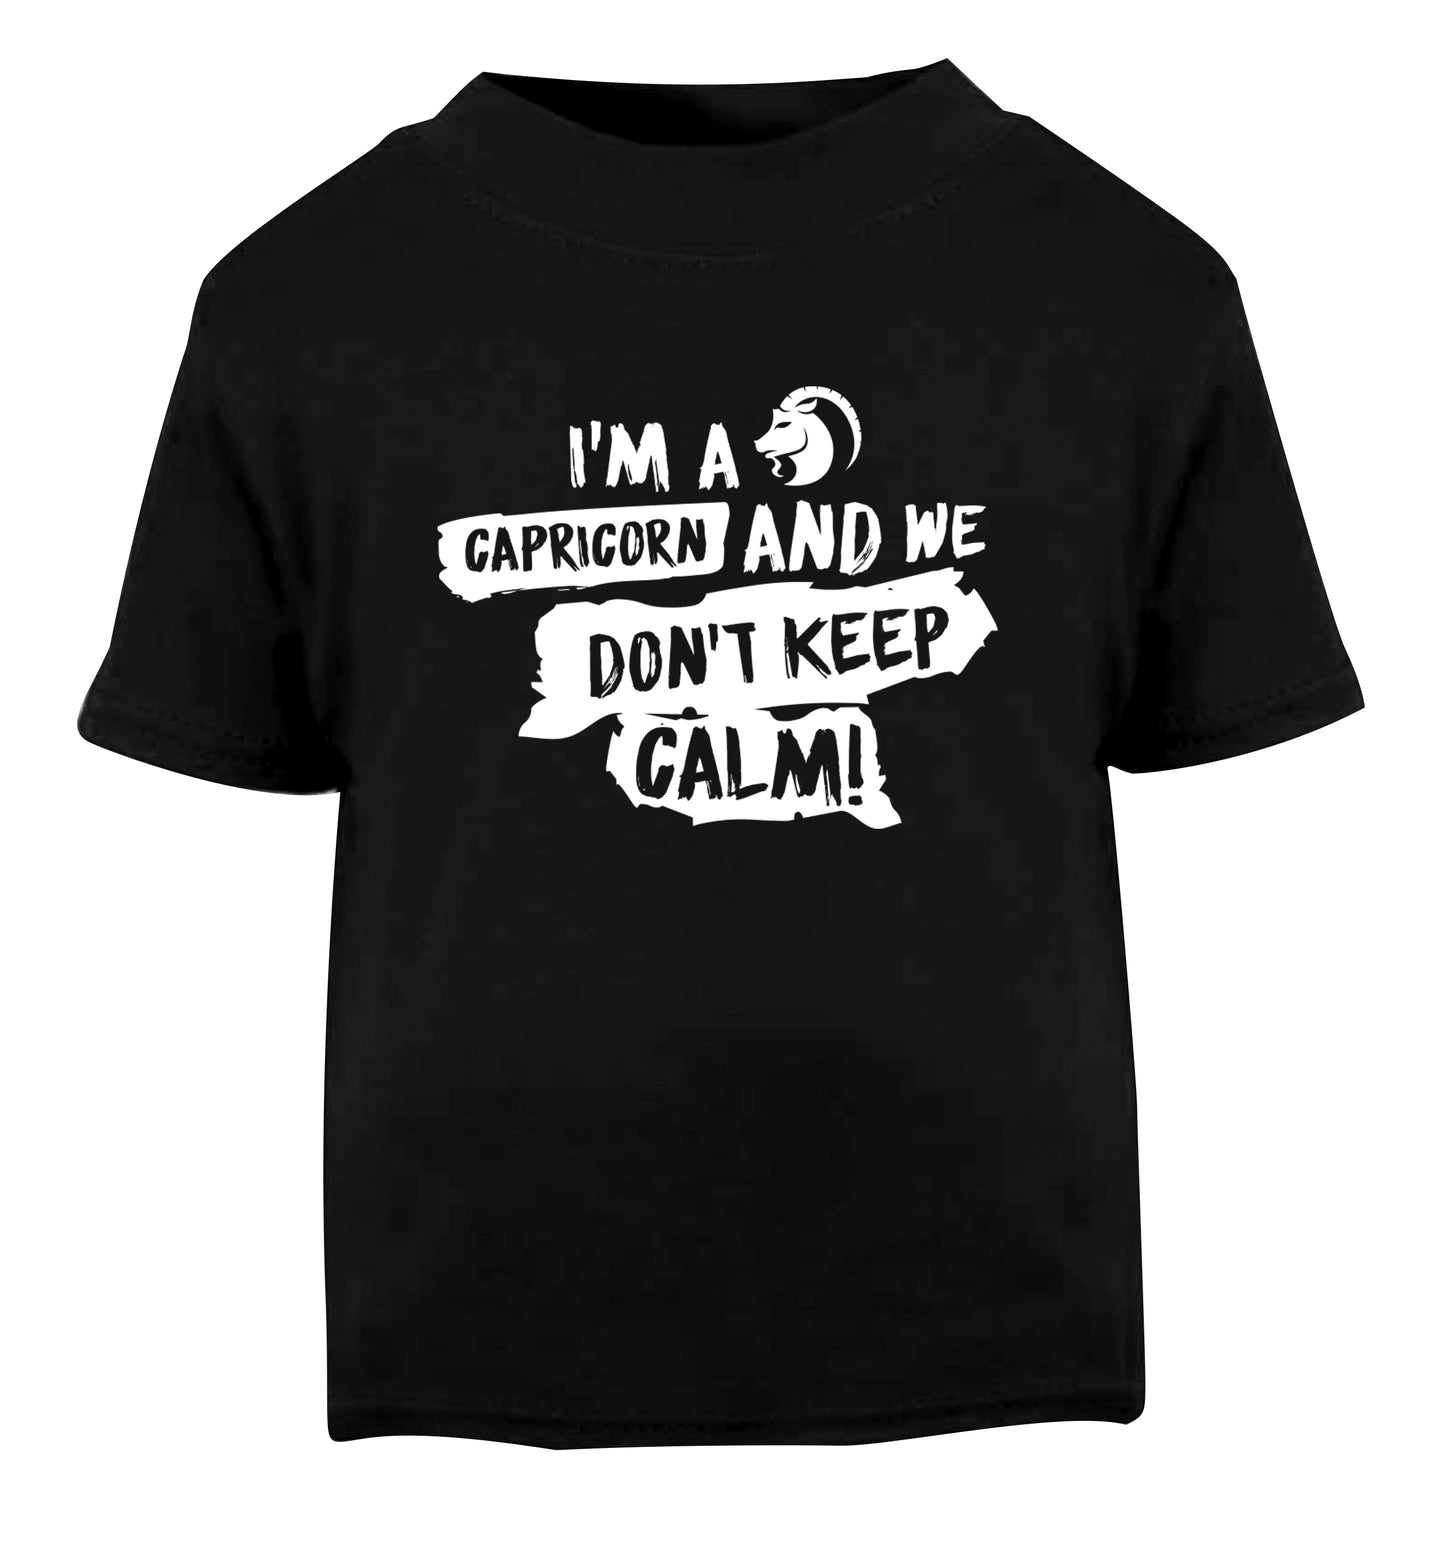 I'm a capricorn and we don't keep calm Black Baby Toddler Tshirt 2 years